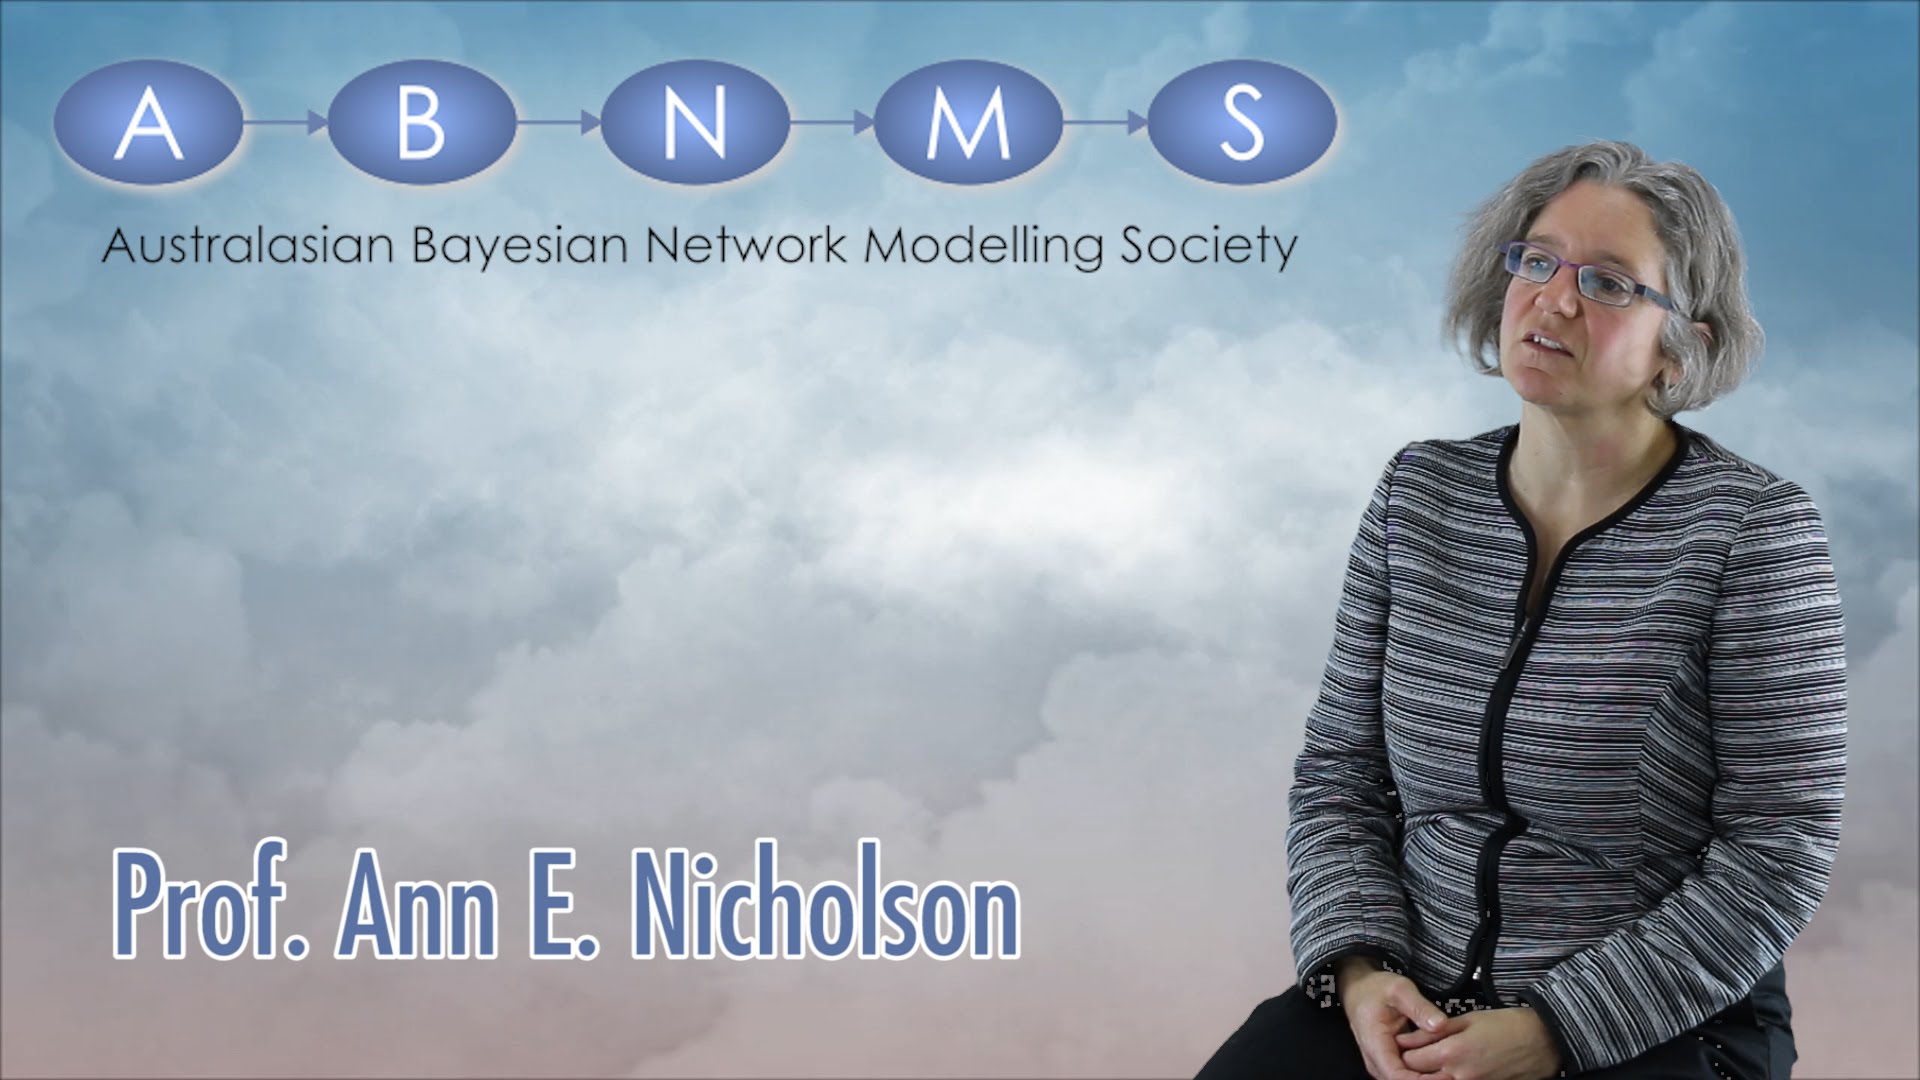 7th Annual Conference of the Australasian Bayesian Network Modelling Society (ABNMS2015)